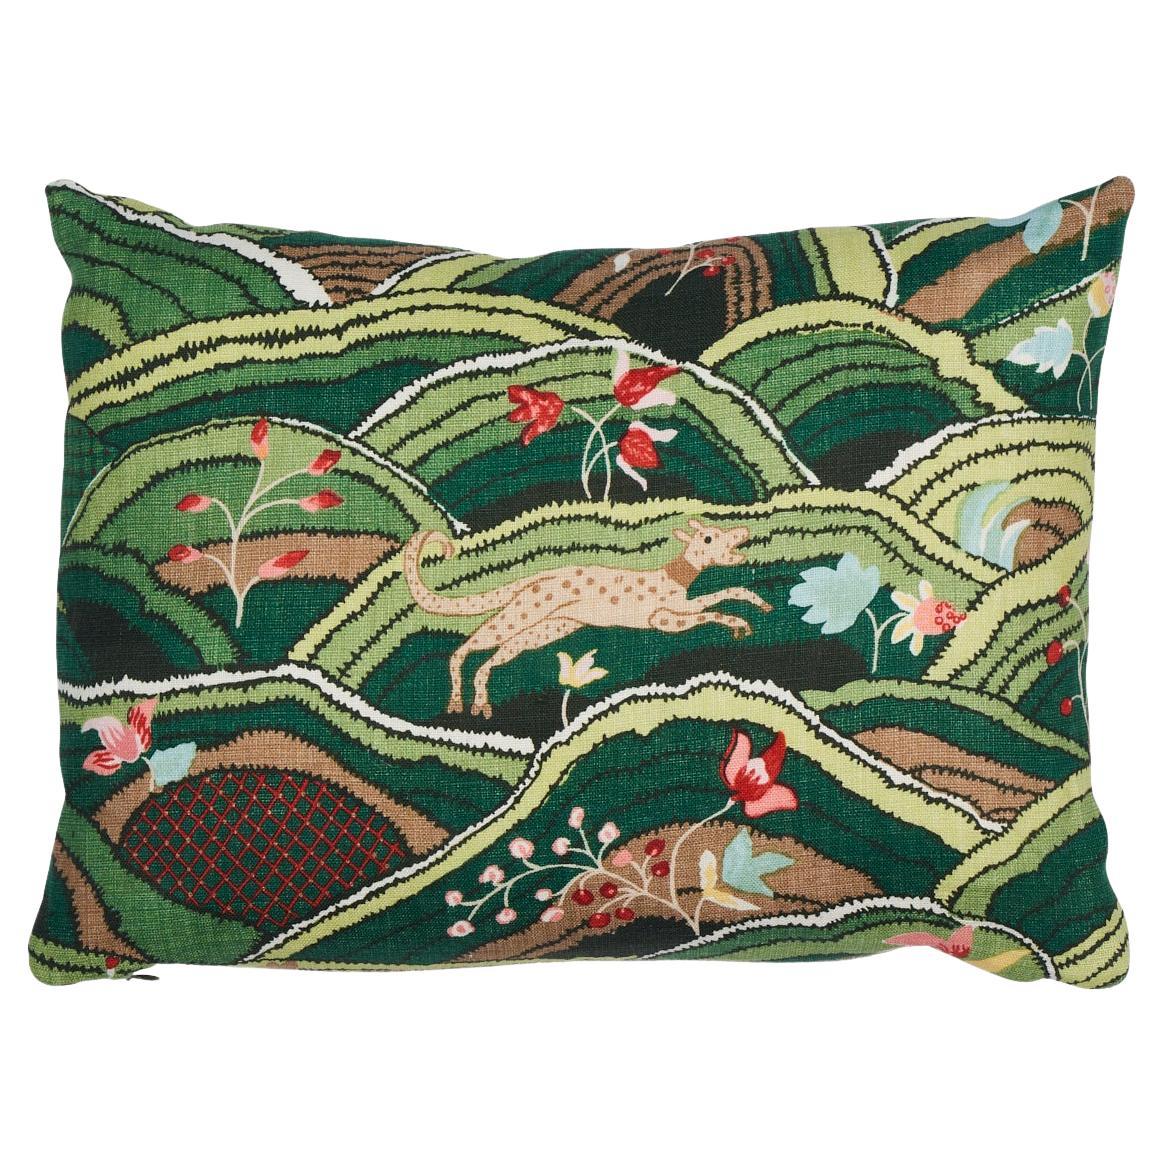 Shumacher Rolling Hills 16x12" Pillow in Green For Sale